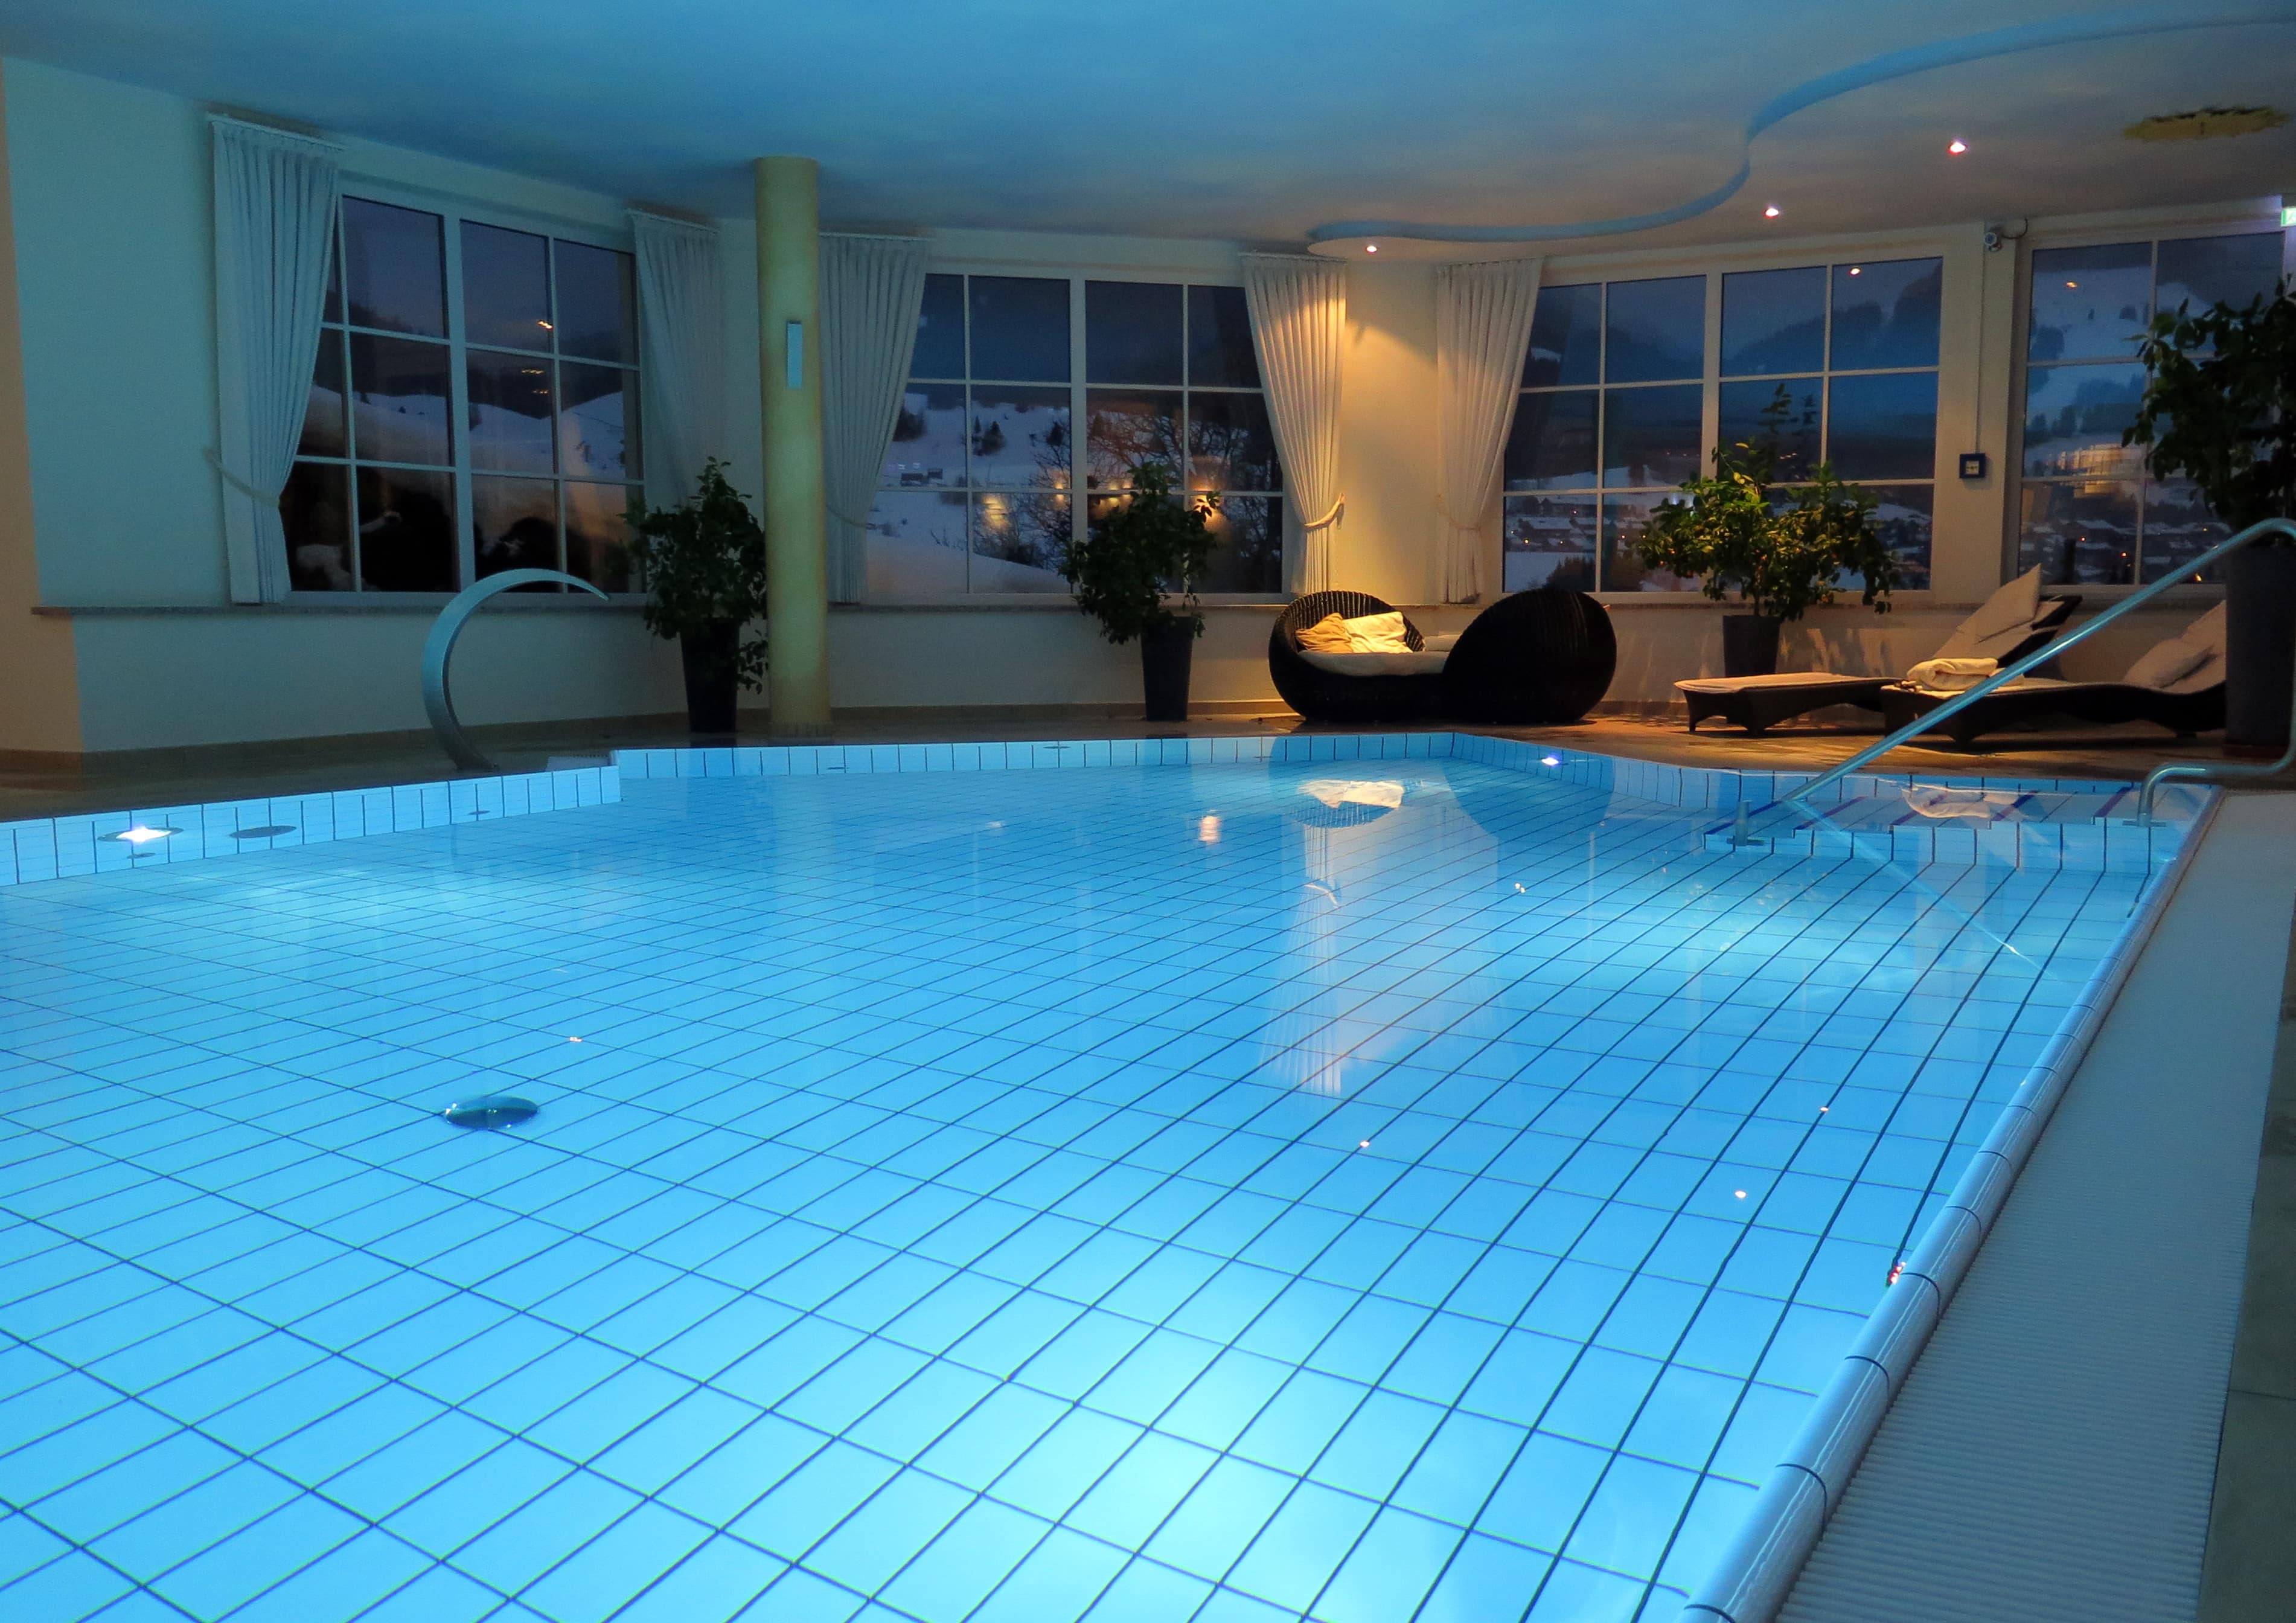 Chill out after a day of exploring in holidays homes with indoor pools